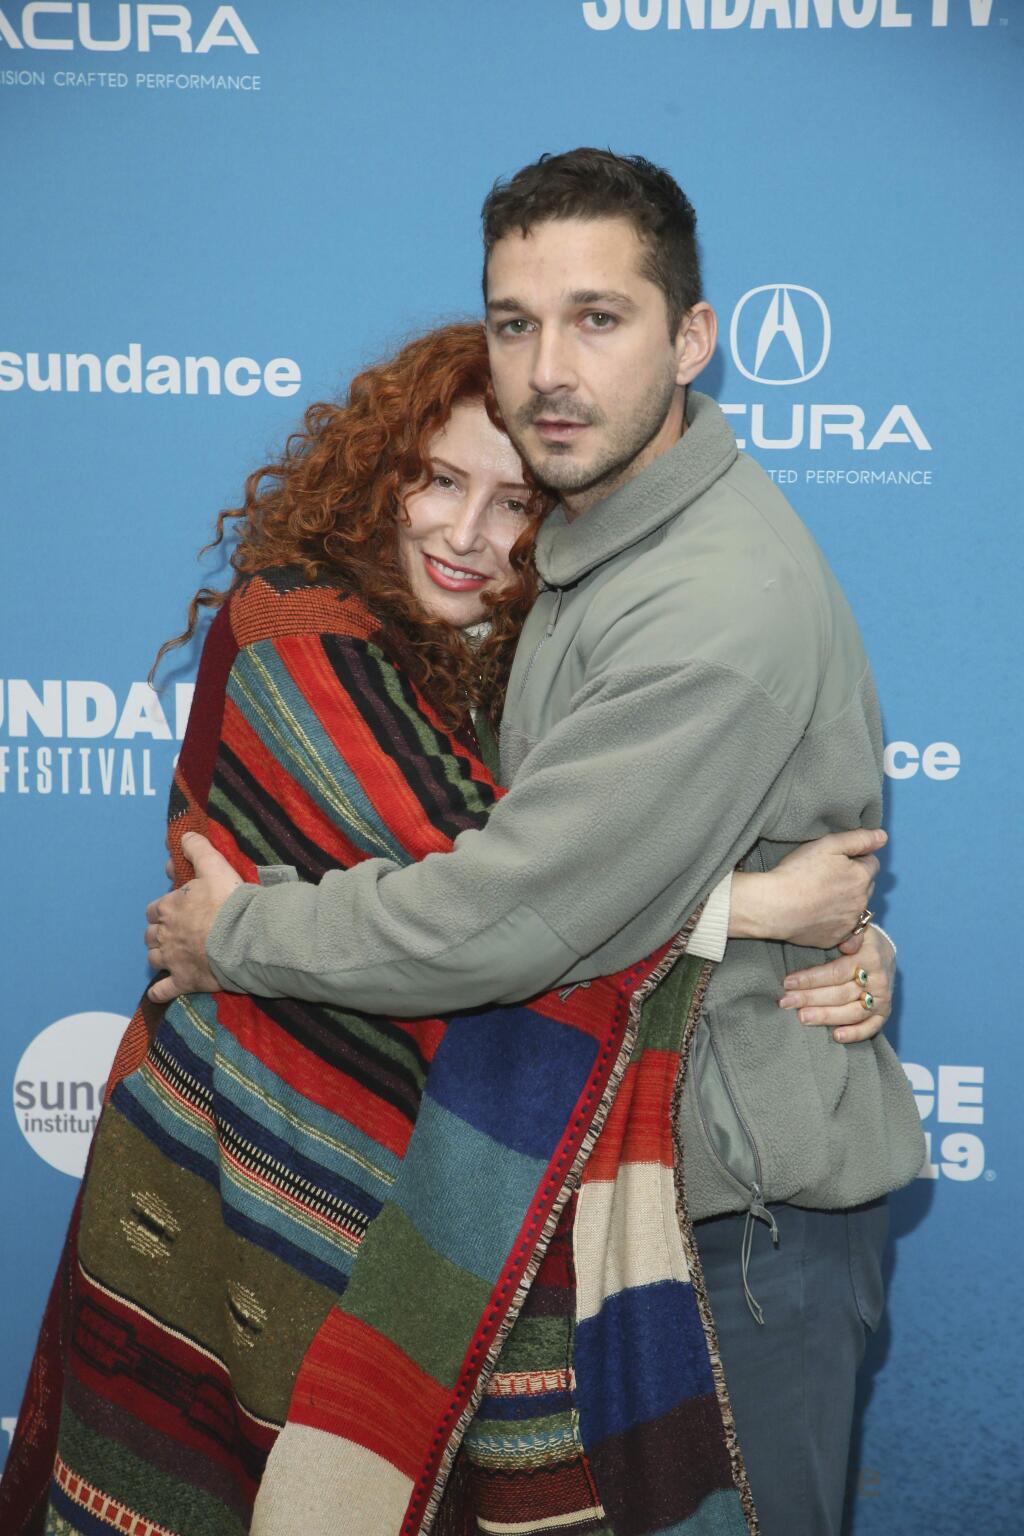 Director Alma Har'el, left, and actor Shia LaBeouf pose at the premiere of 'Honey Boy' during the 2019 Sundance Film Festival, Friday, Jan. 25, 2019, in Park City, Utah. (Photo by Danny Moloshok/Invision/AP)